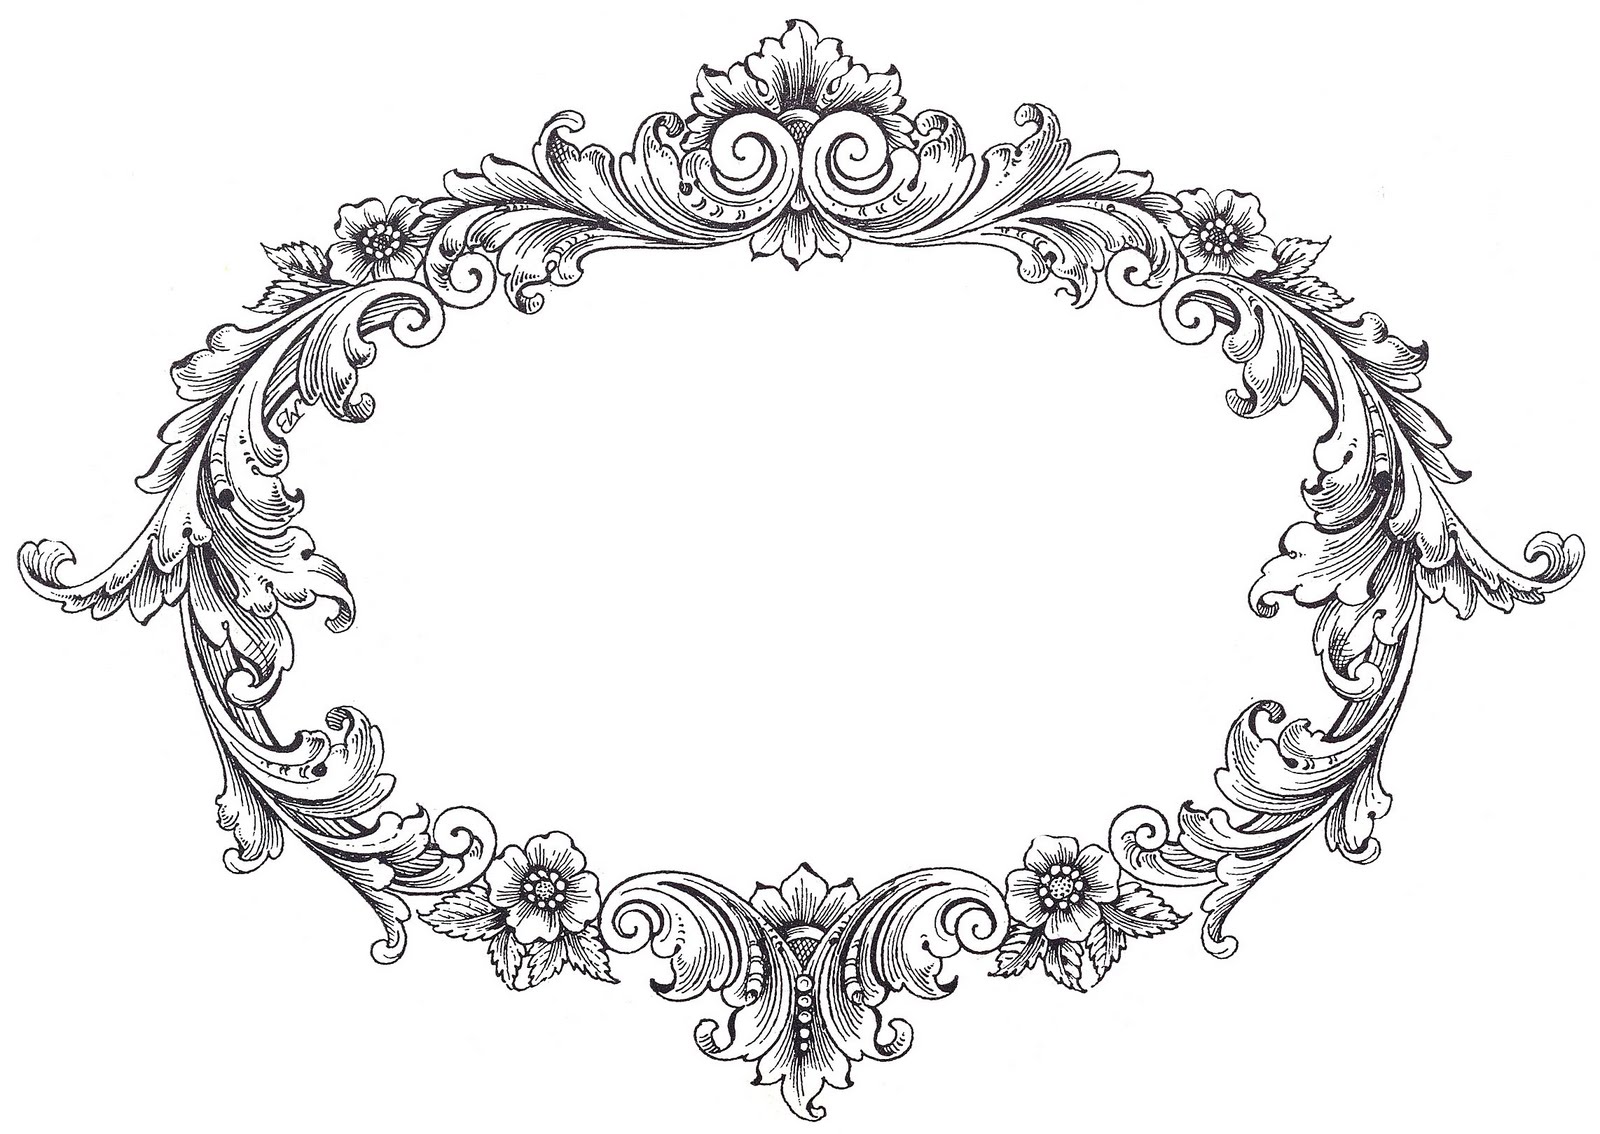 Vintage Clip Art   Fancy Oval Frame   The Graphics Fairy